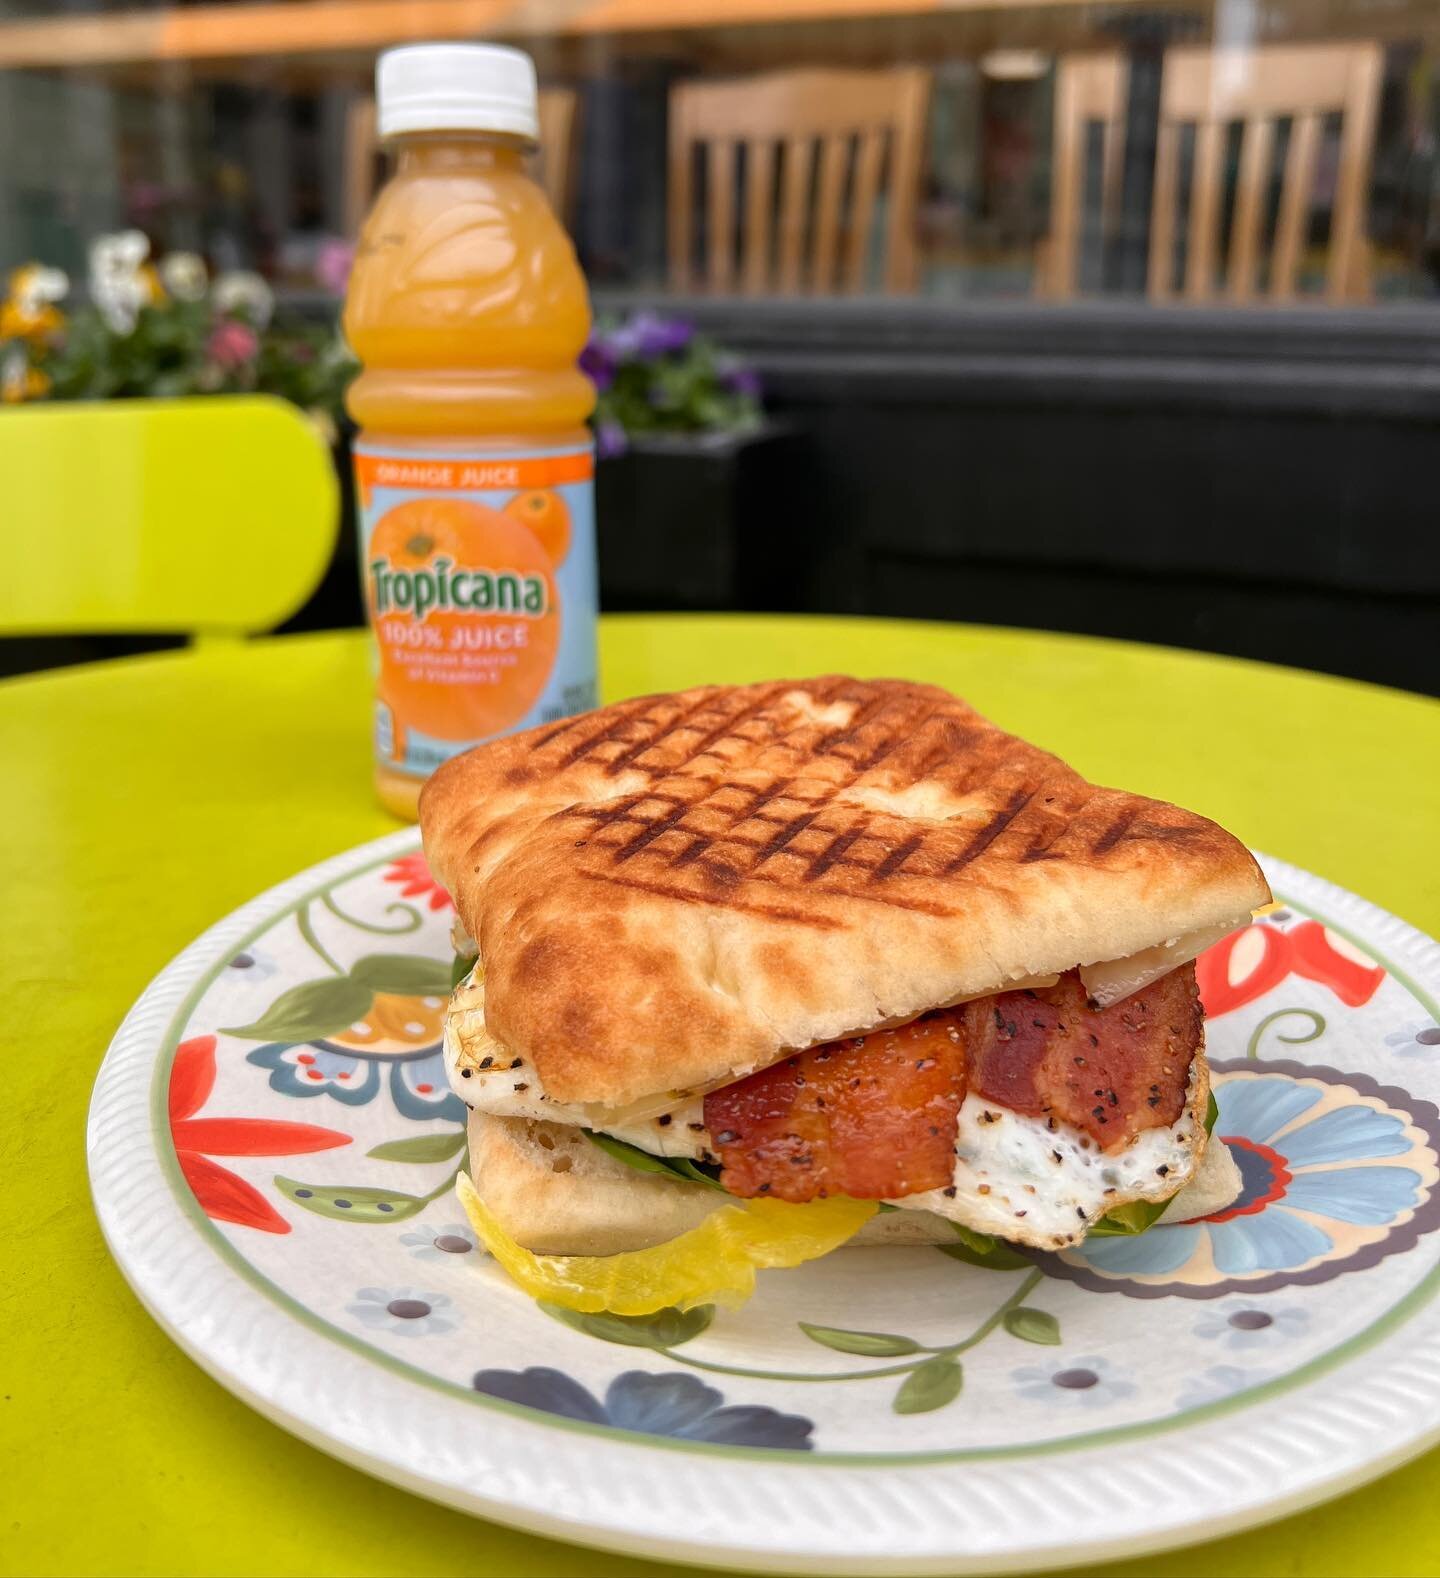 Good morning to this breakfast sandwich and this breakfast sandwich only 🤤🤤🤤

Portland opens at 9 so you can snag a breakfast sandwich made to order to fuel your day ☀️

Come see our newly painted pink walls and say hi to the best crew in Monument